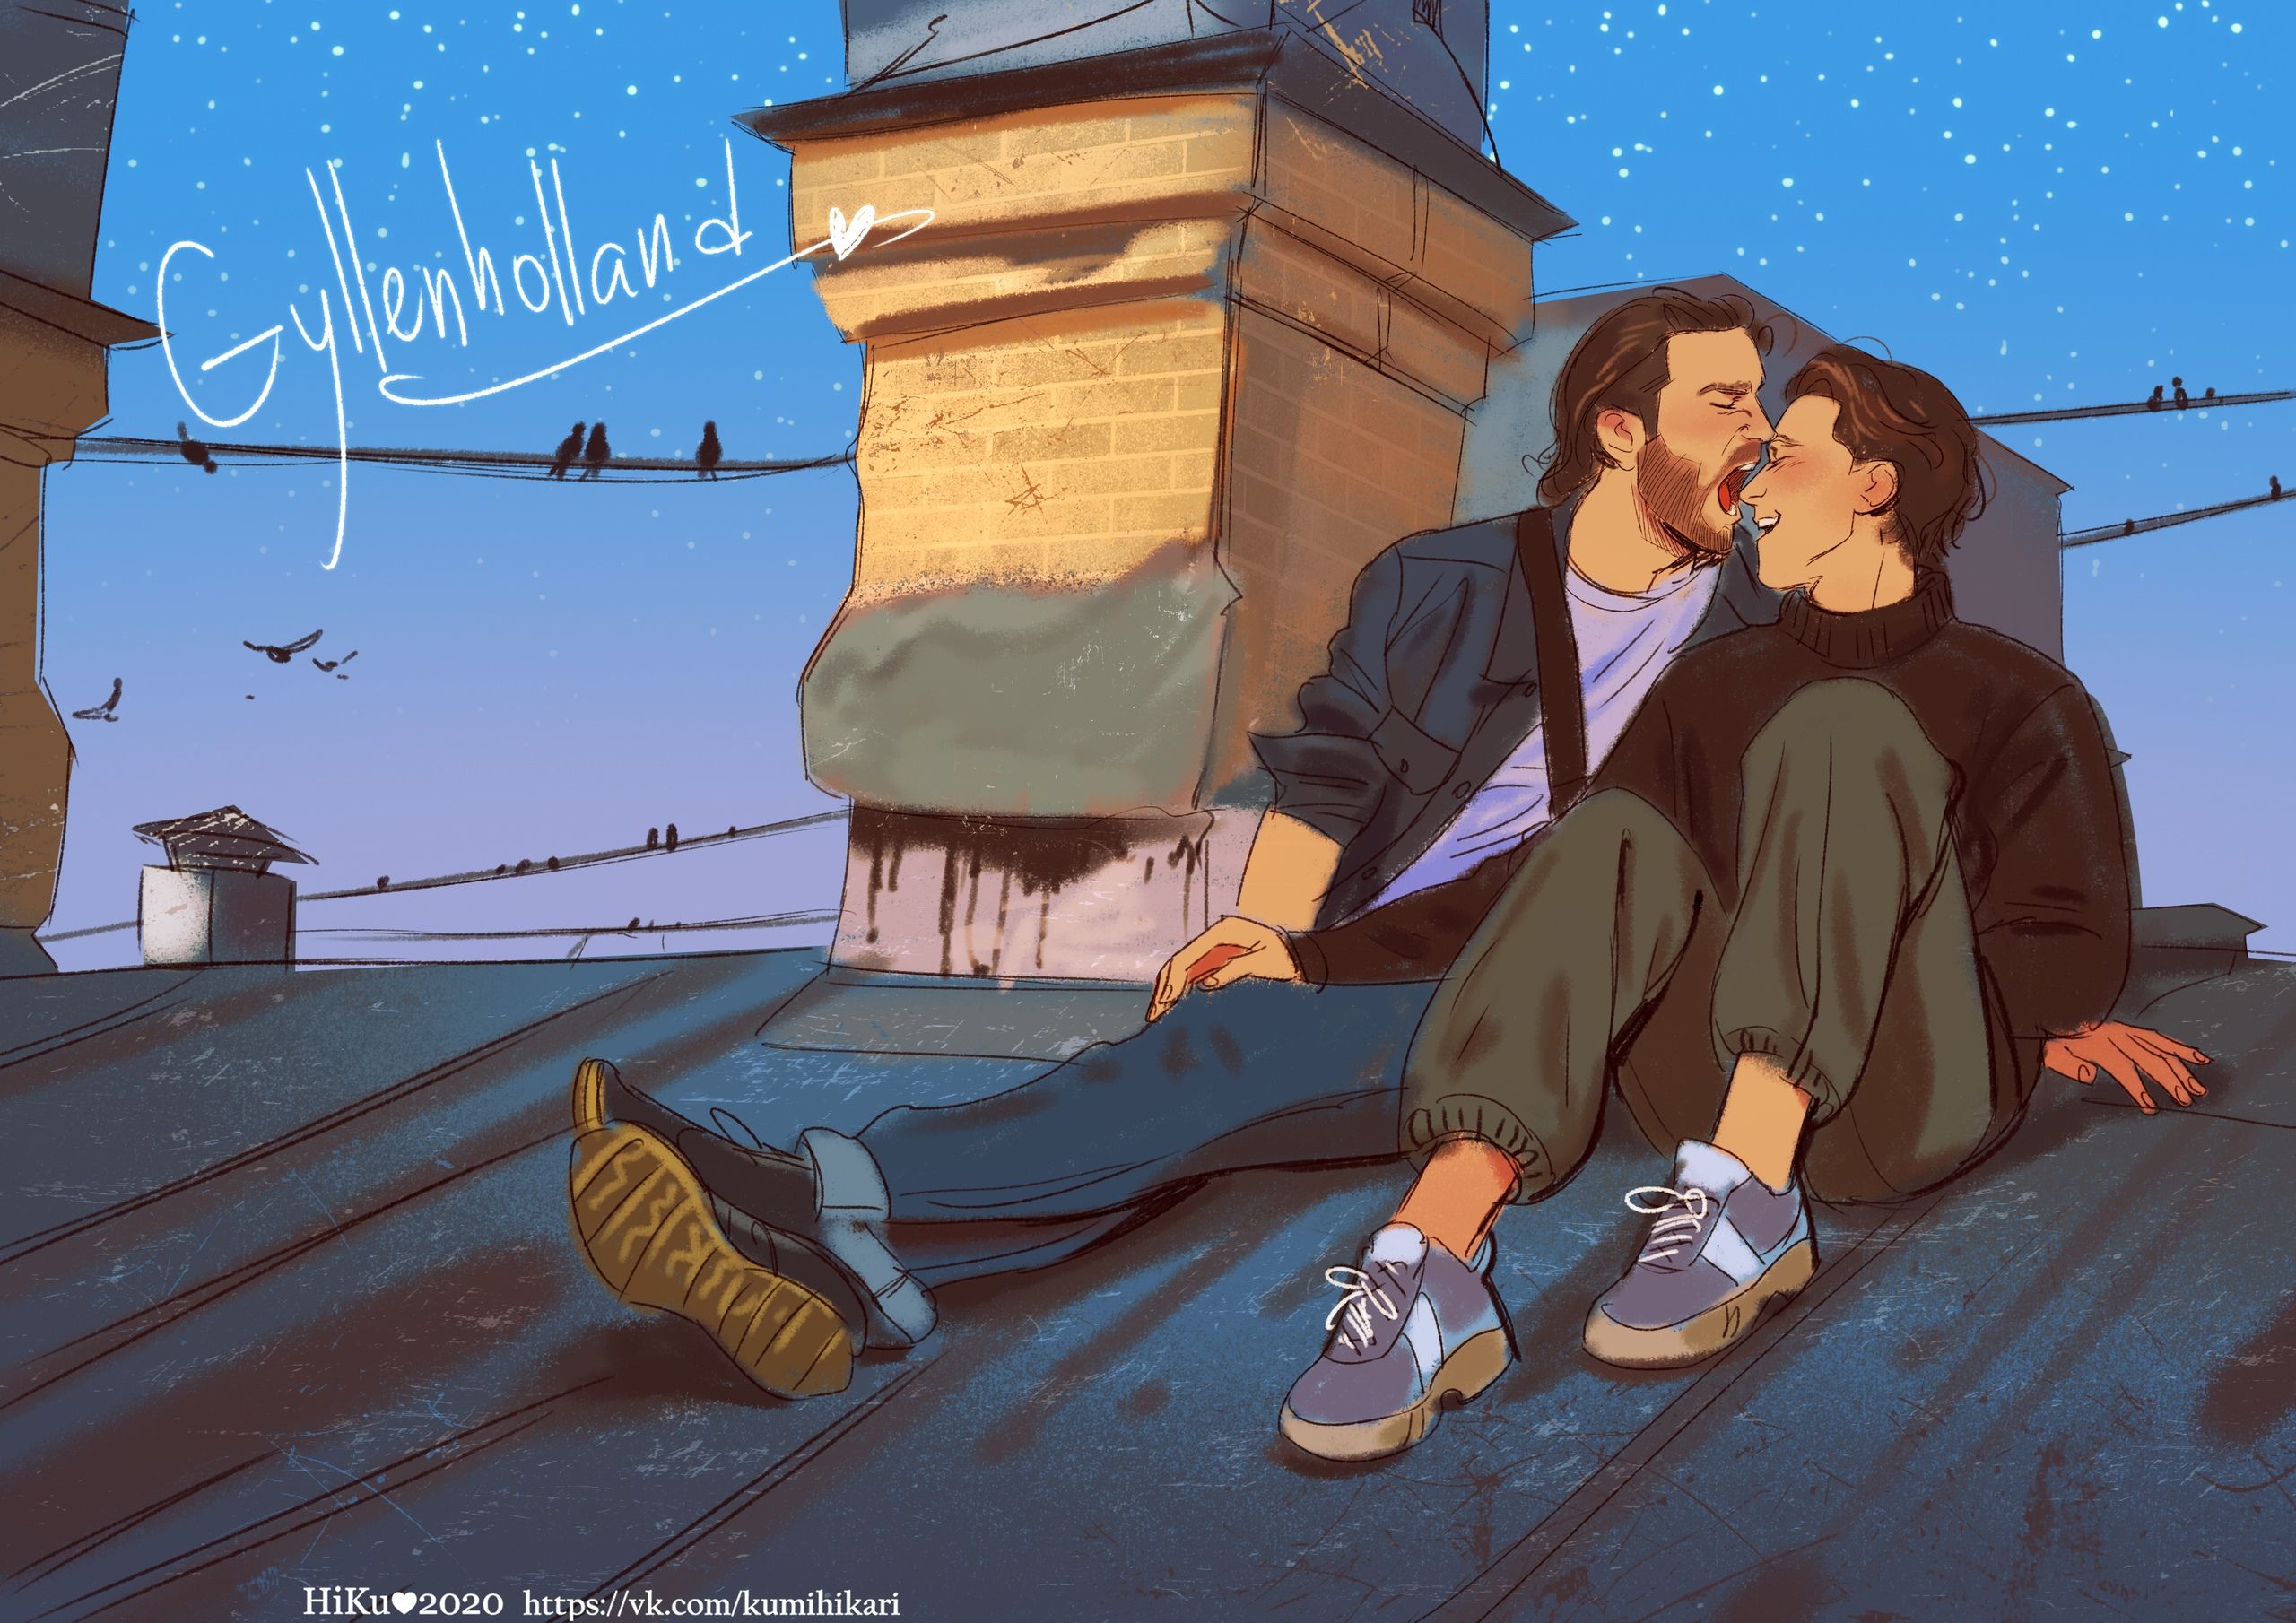 A digital illustration of a man and a woman sitting on a rooftop, kissing. They are wearing blue and grey converse shoes. - Tom Holland